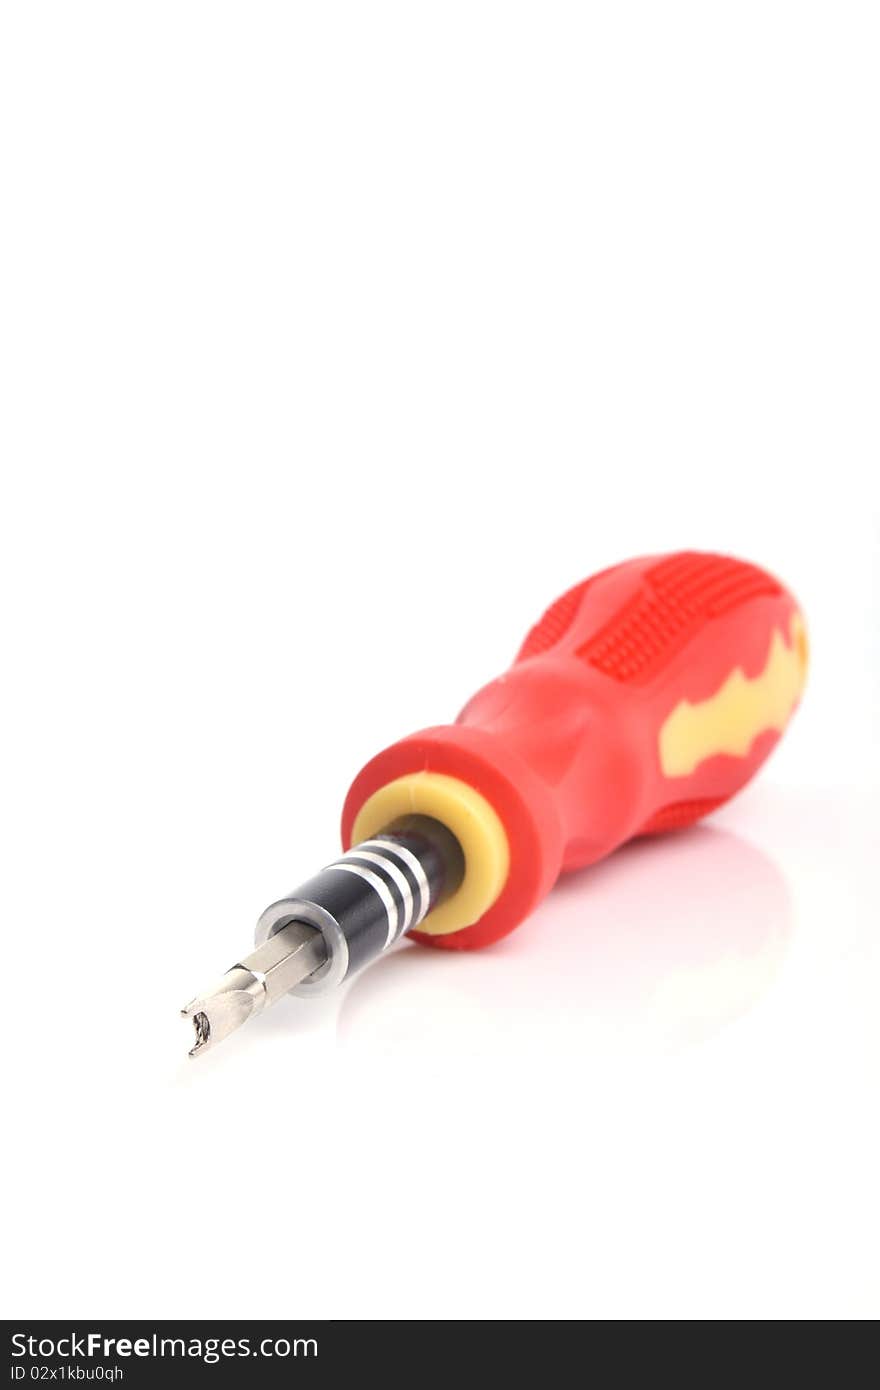 Focus screwdriver head over a white background